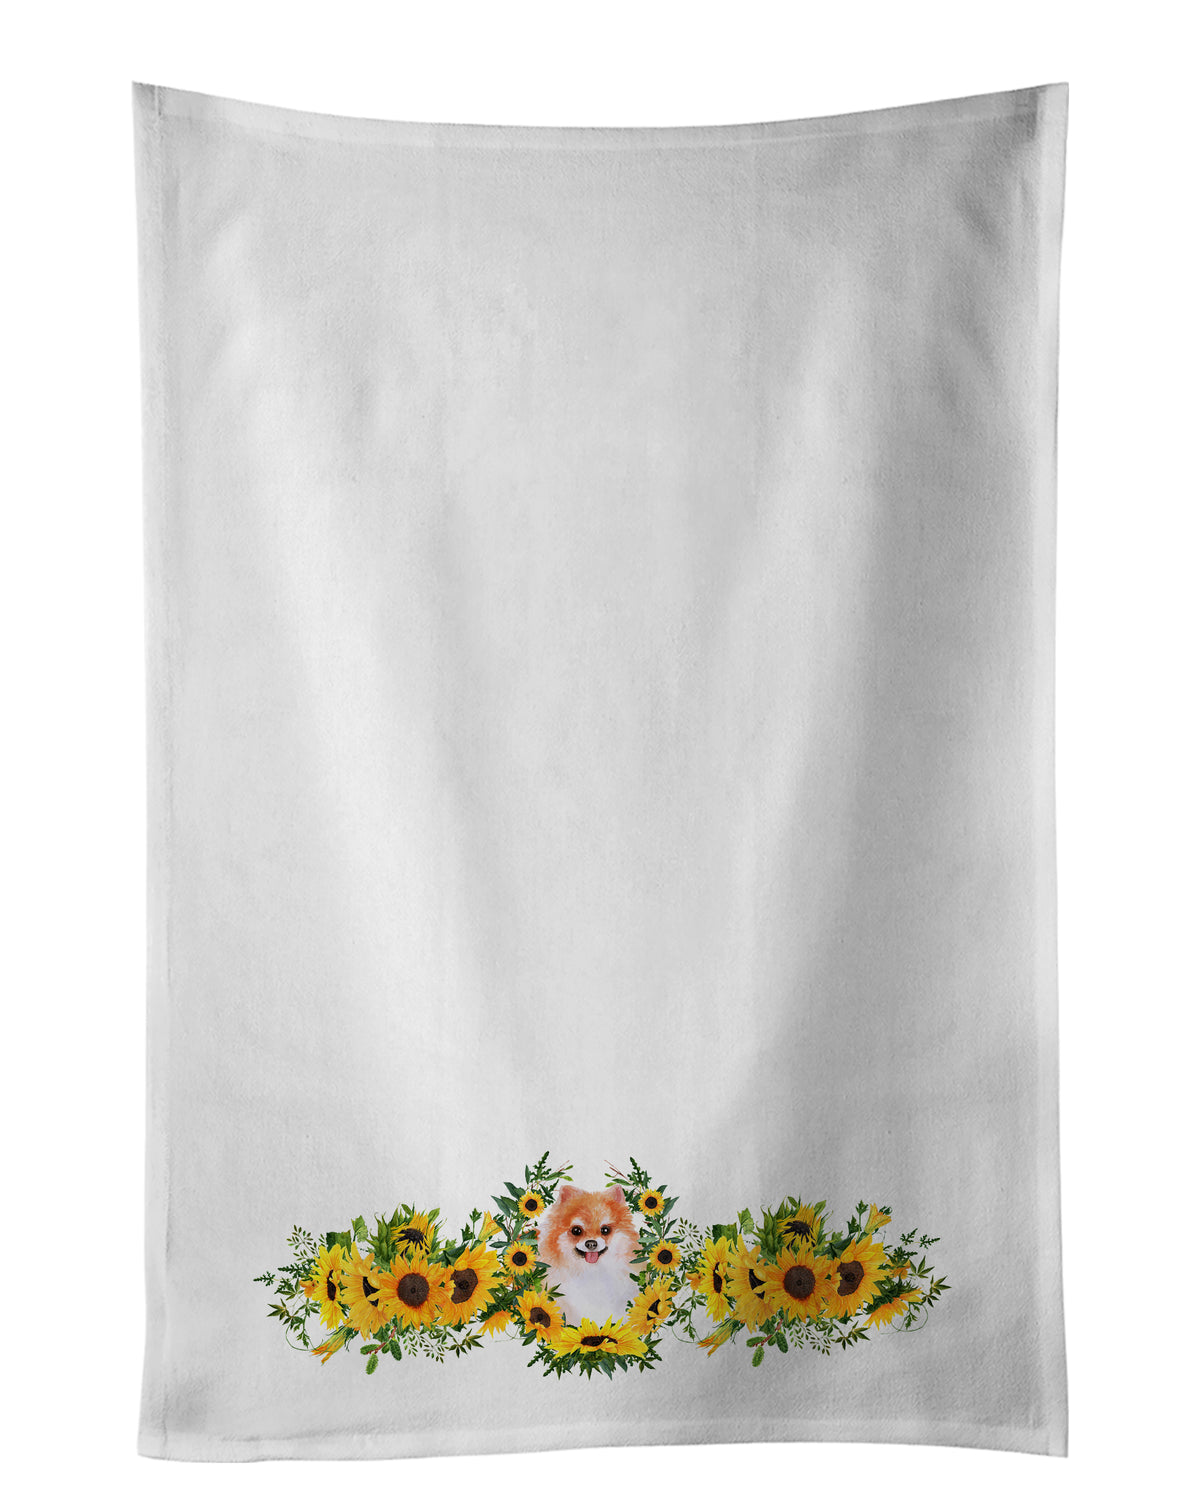 Buy this Pomeranian #2 in Sunflowers White Kitchen Towel Set of 2